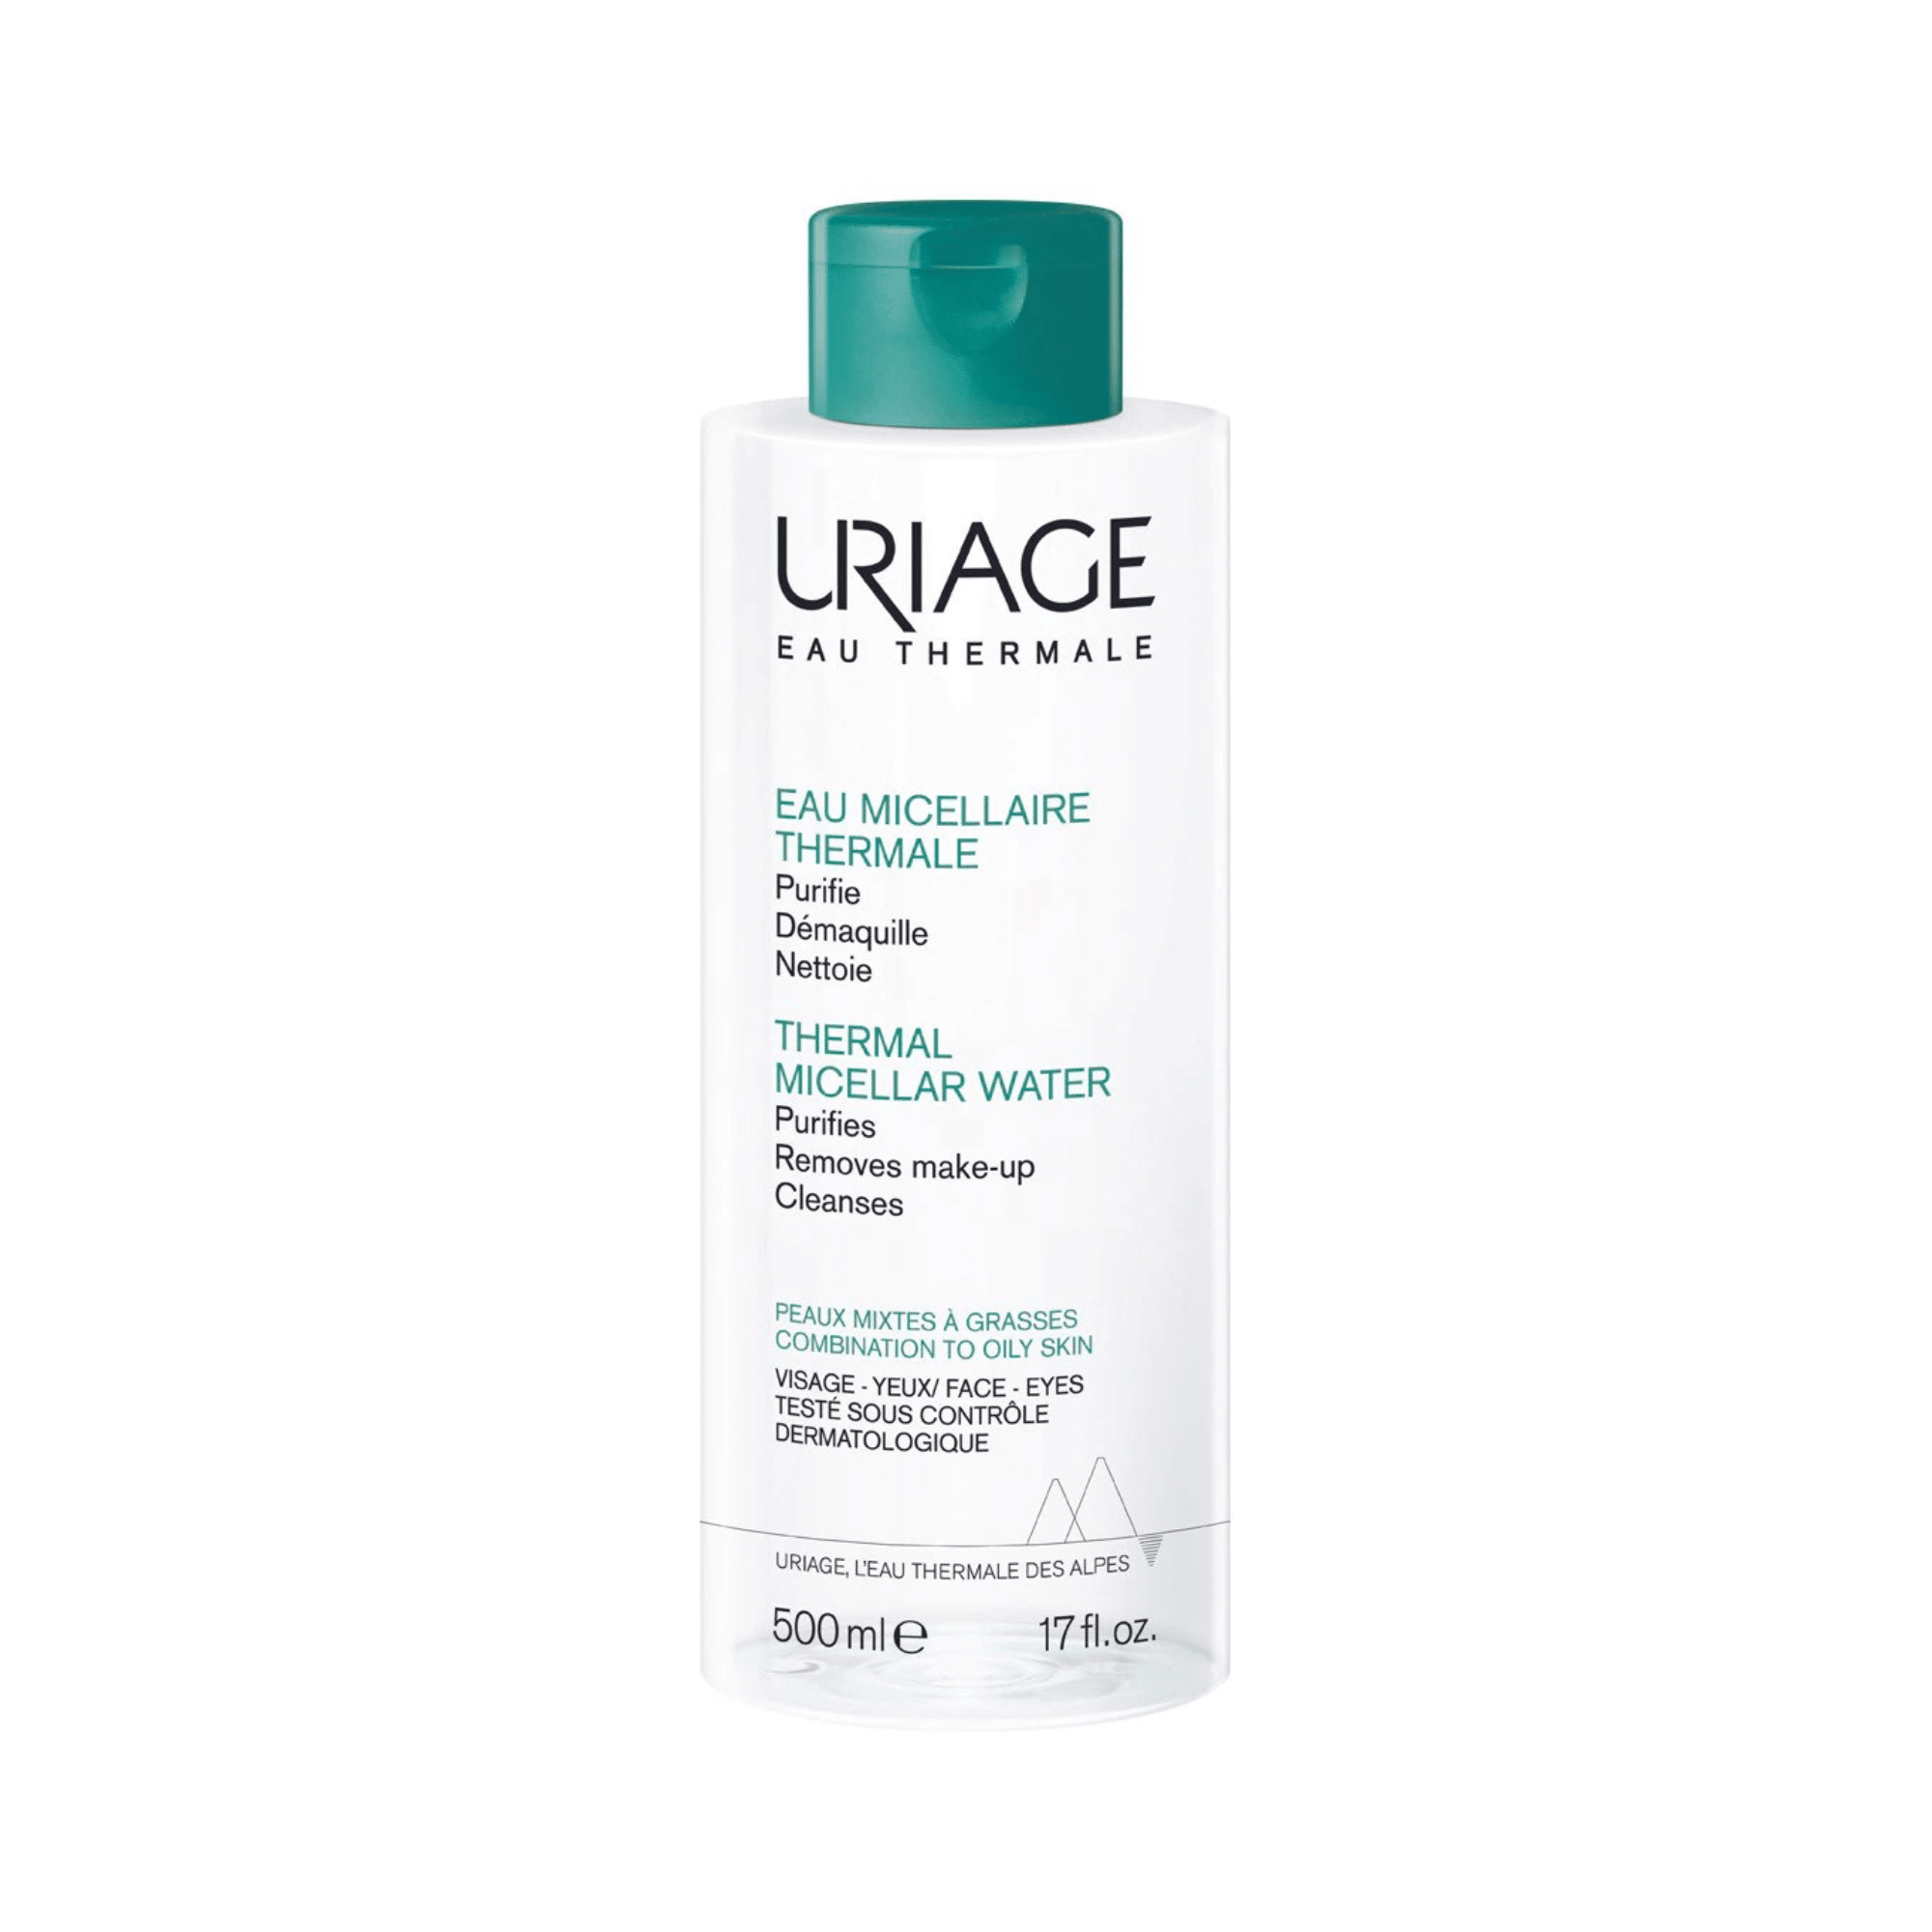 Uriage Thermal Micellar Water Combination to Oily Skin 500ml - Face, Eyes